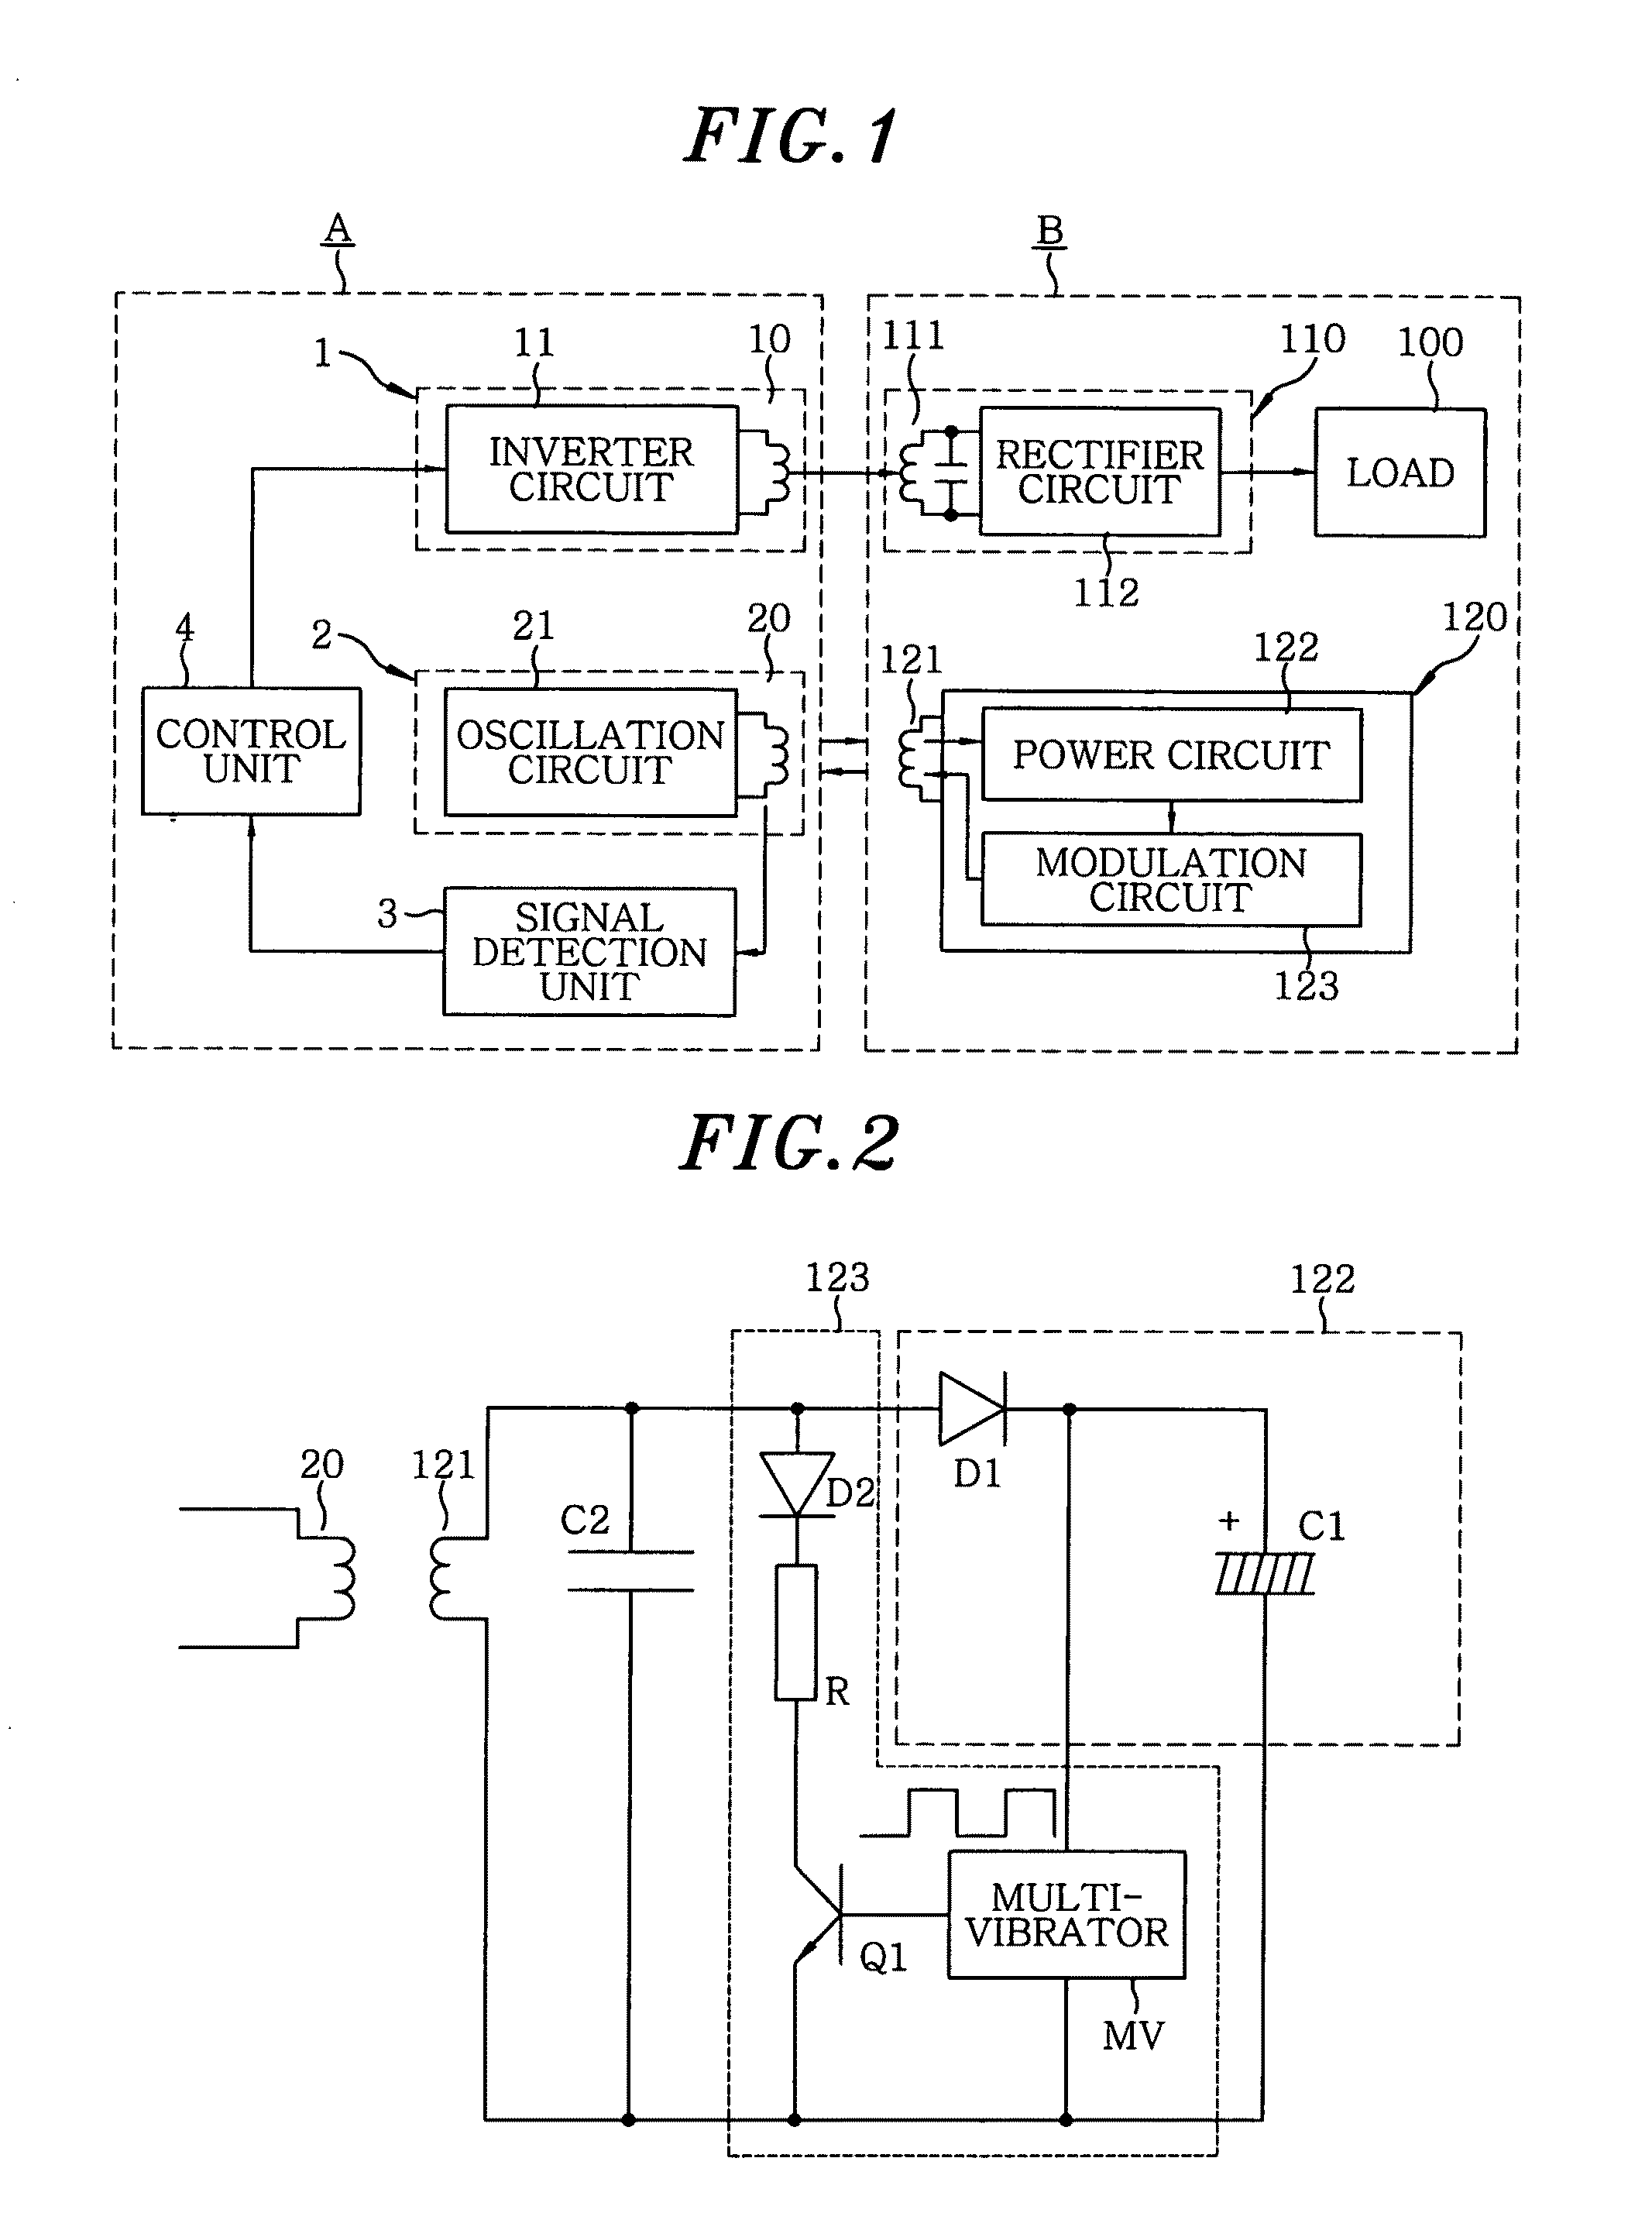 Non-contact power supply system